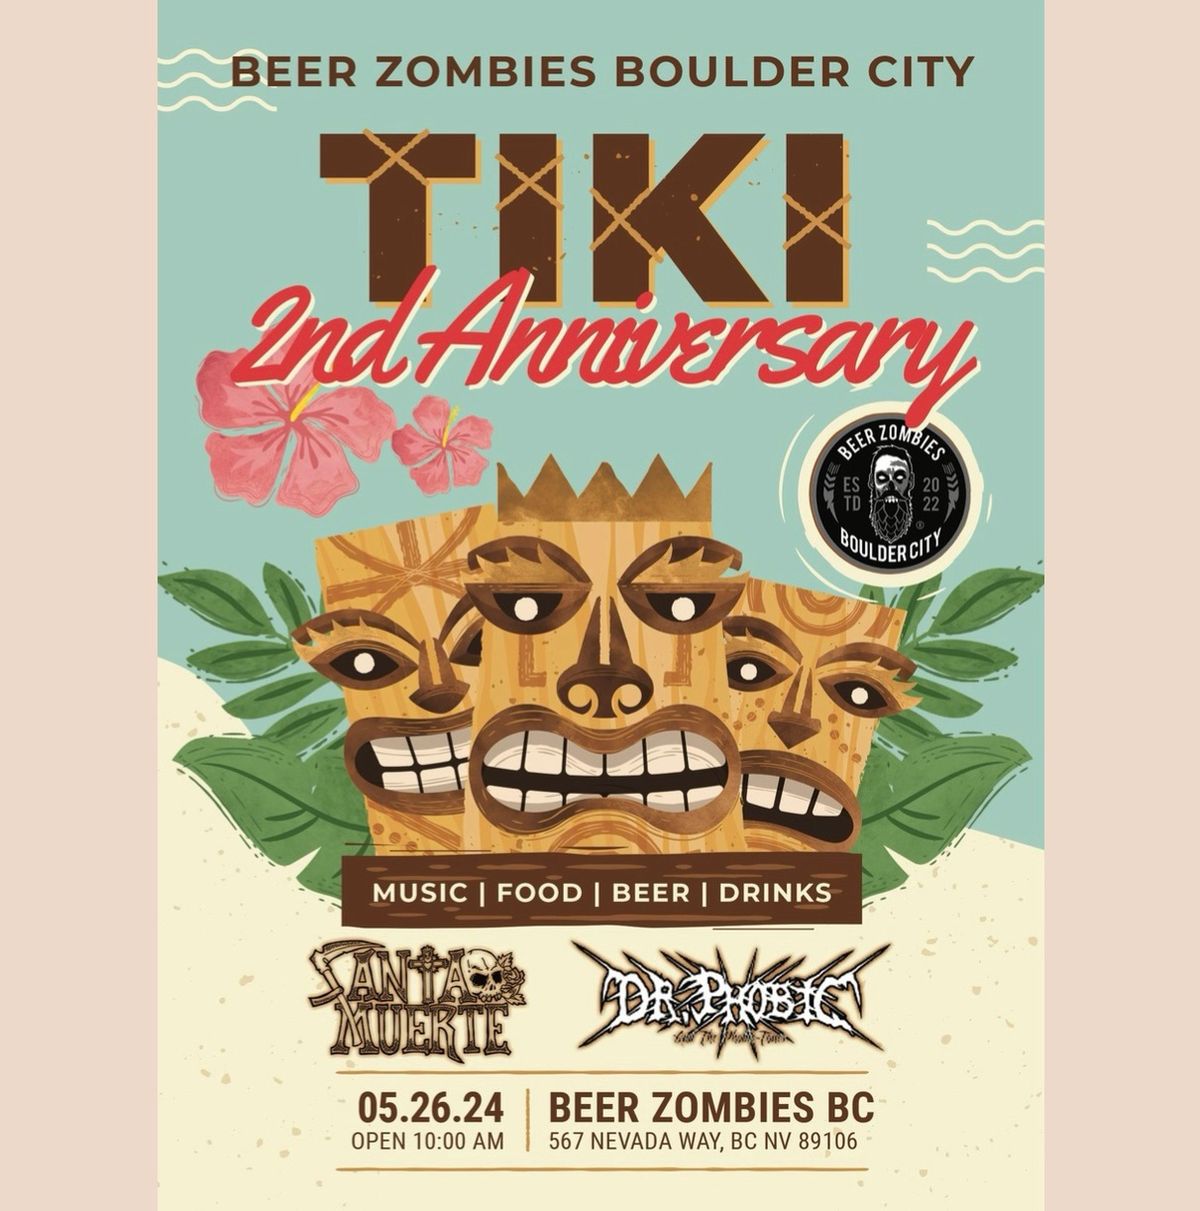 Beer Zombies Boulder City 2nd Anniversary 